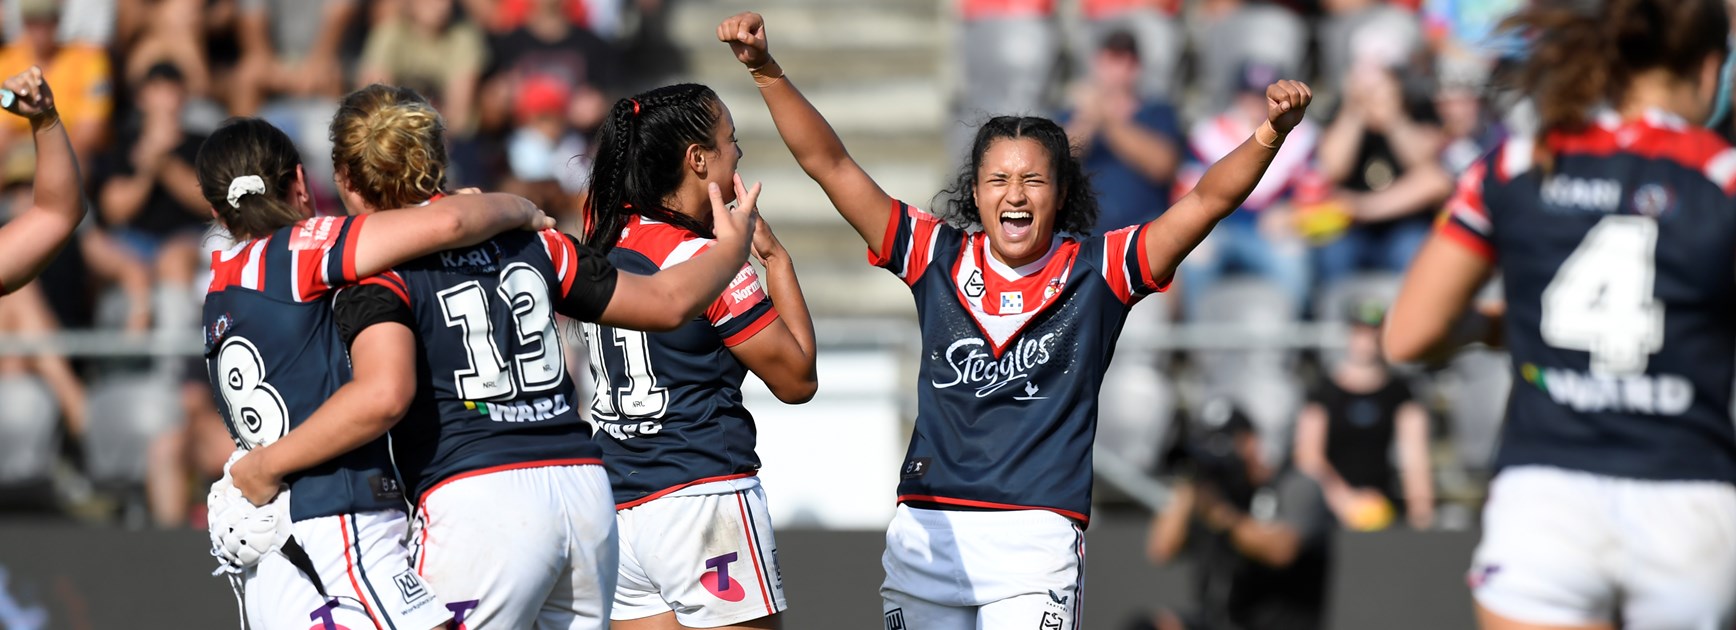 Temara roars for the Roosters as focus resets for new season